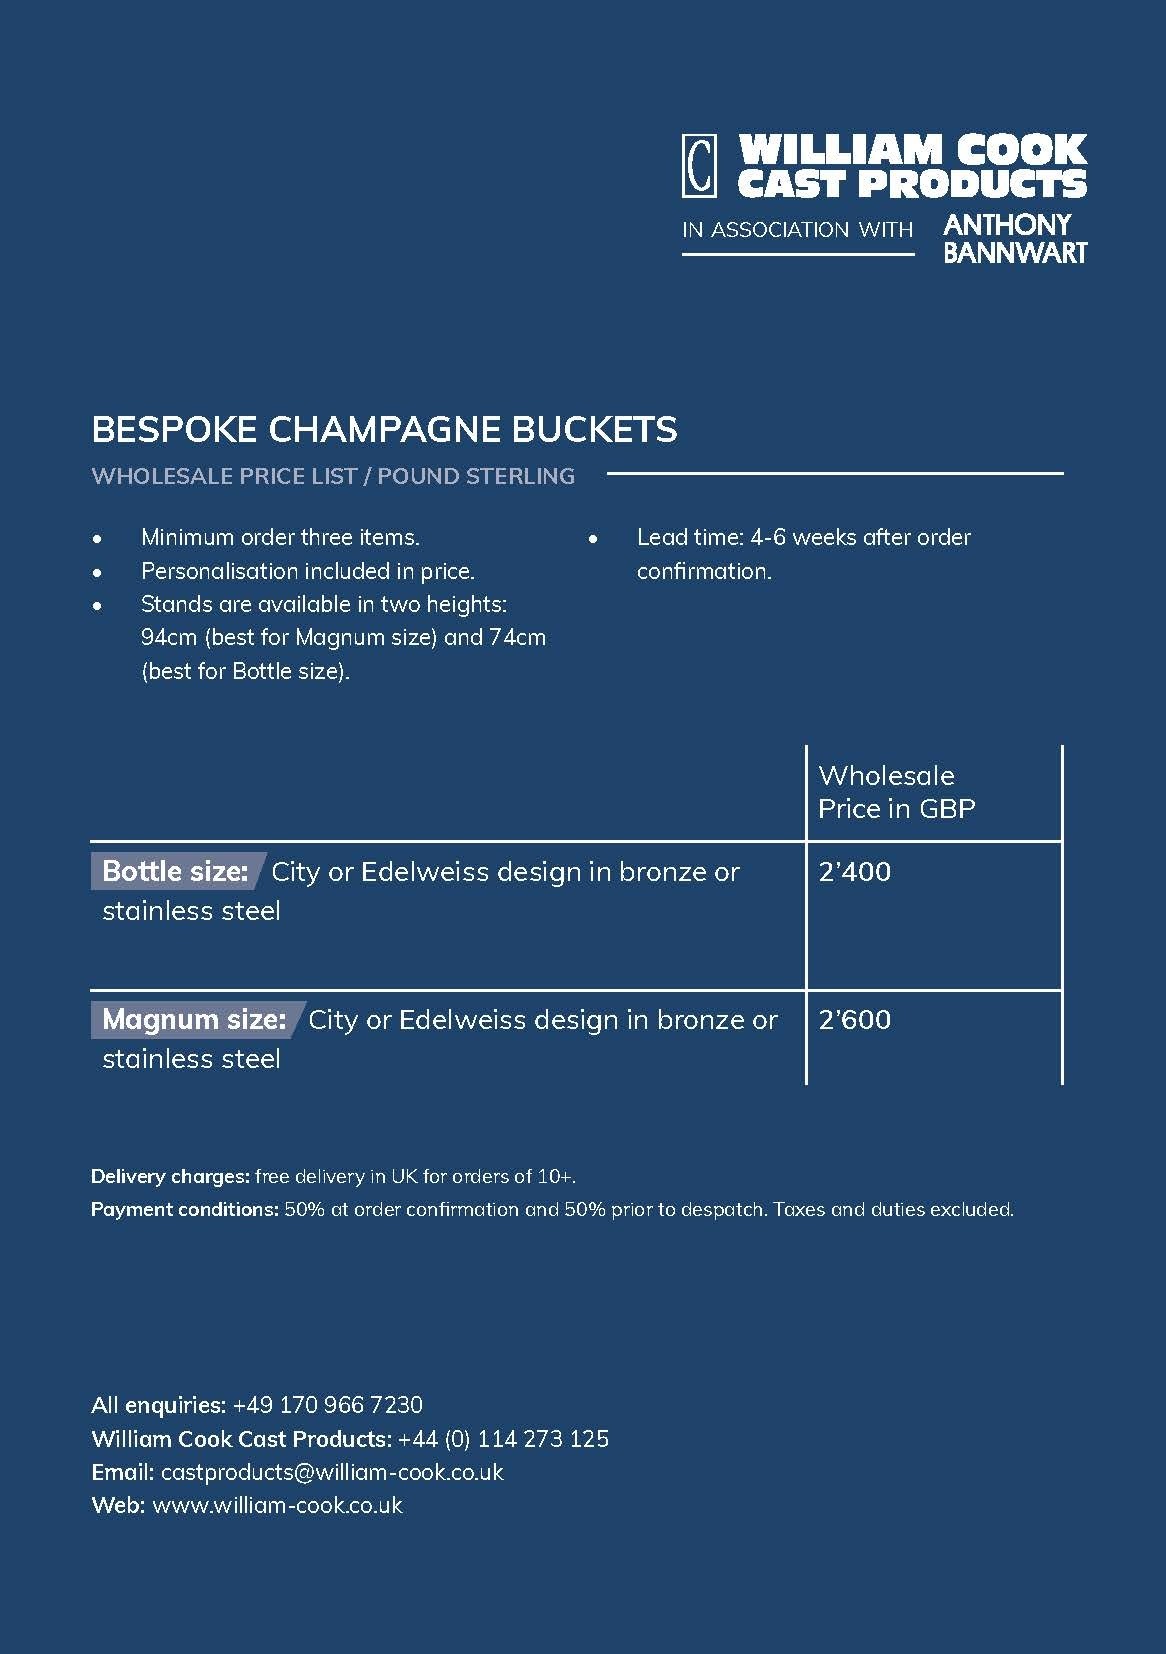 William Cook Cast Products in association with Anthony Bannwart Bespoke Champagne Buckets - Pricelists: Retail & Wholesale (GBP, EUR, CHF)